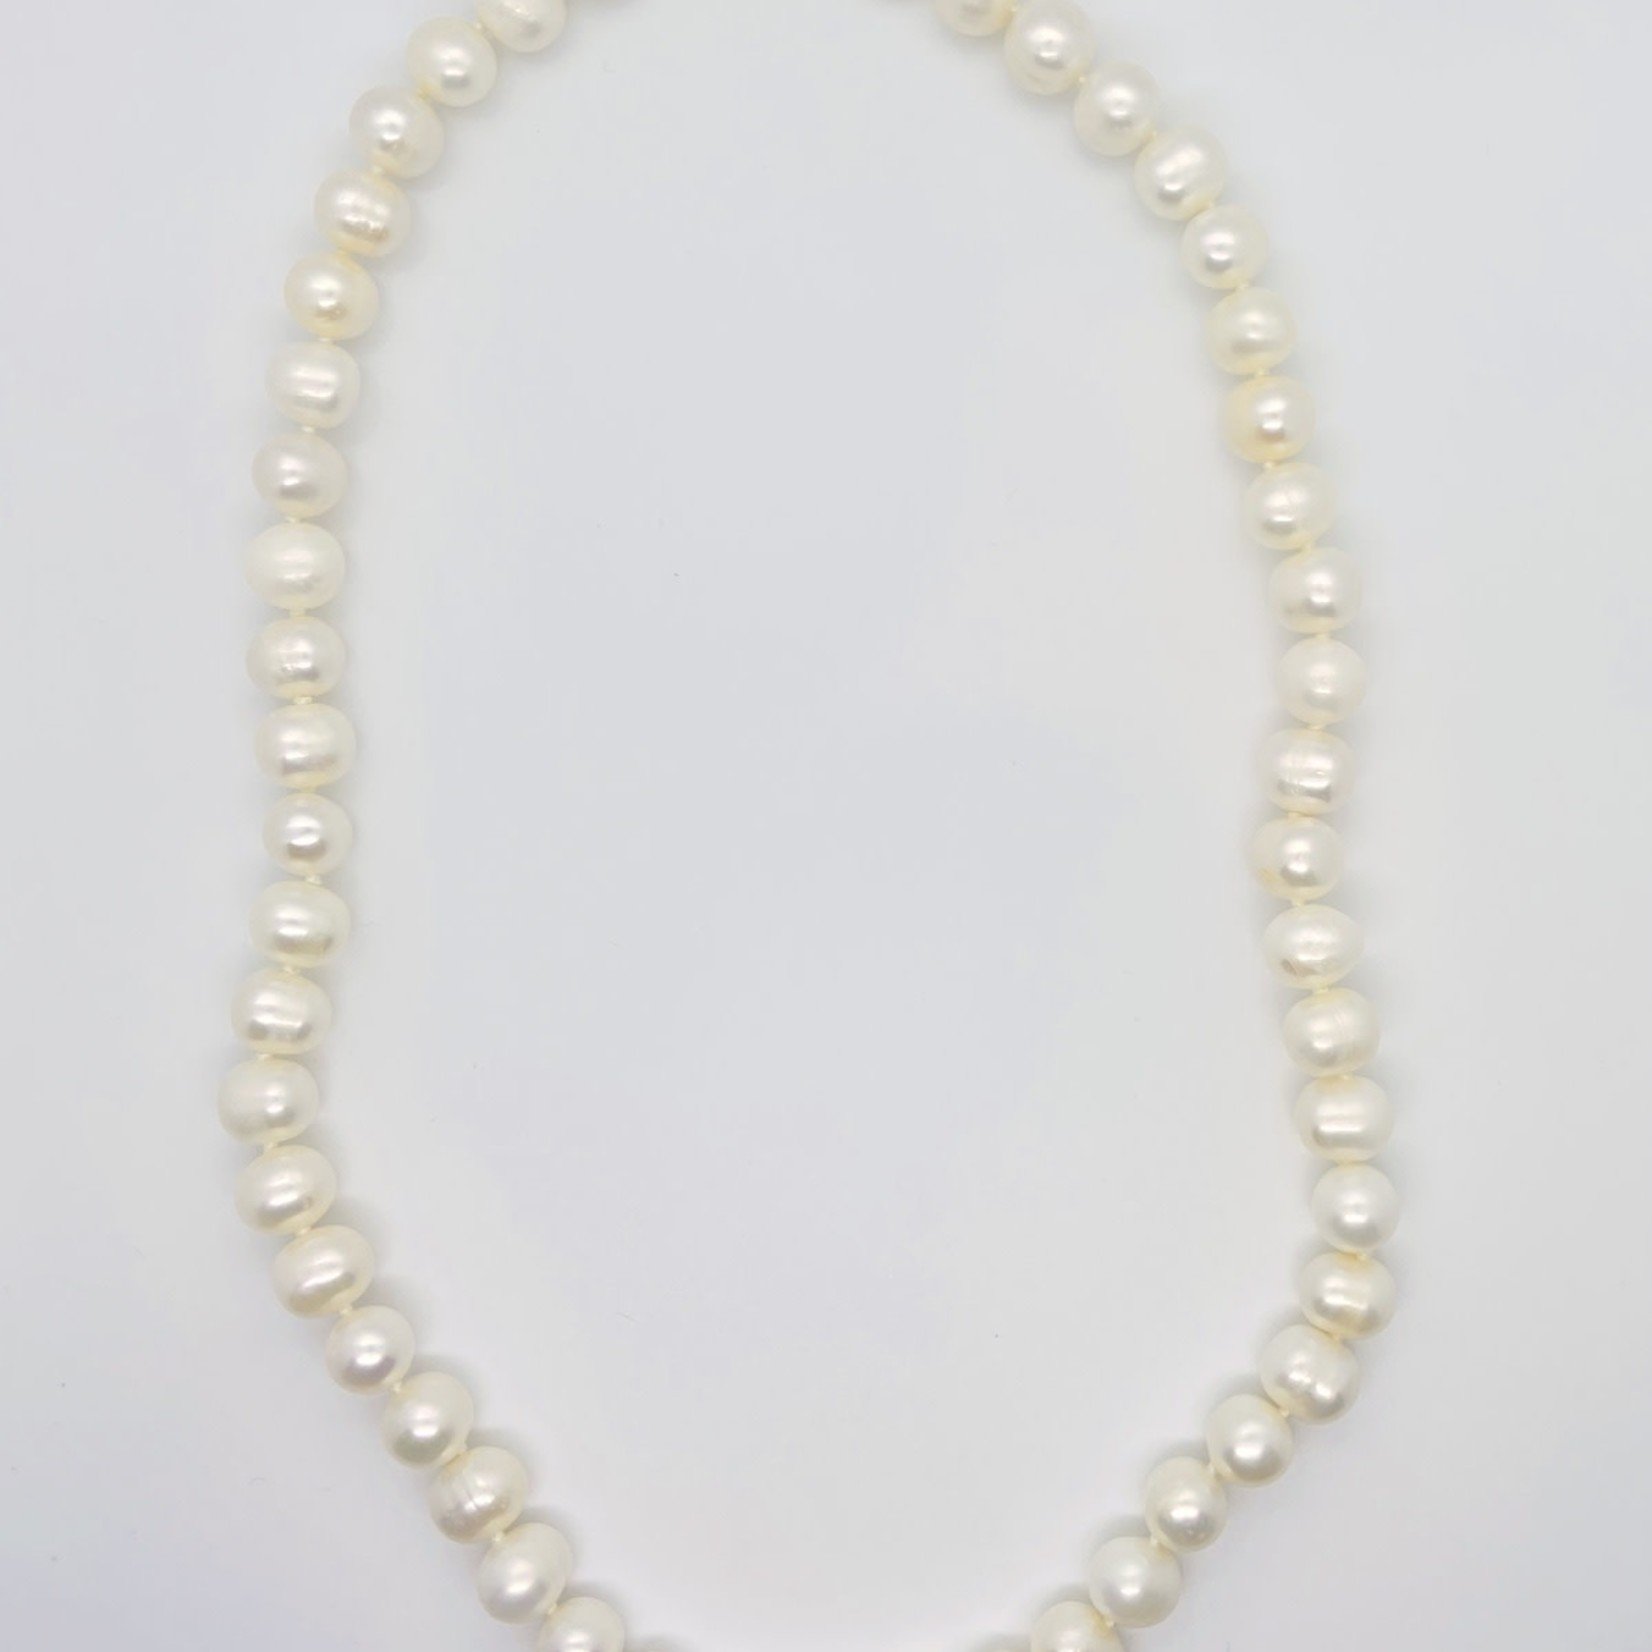 Freshwater Pearl Necklace, 18"